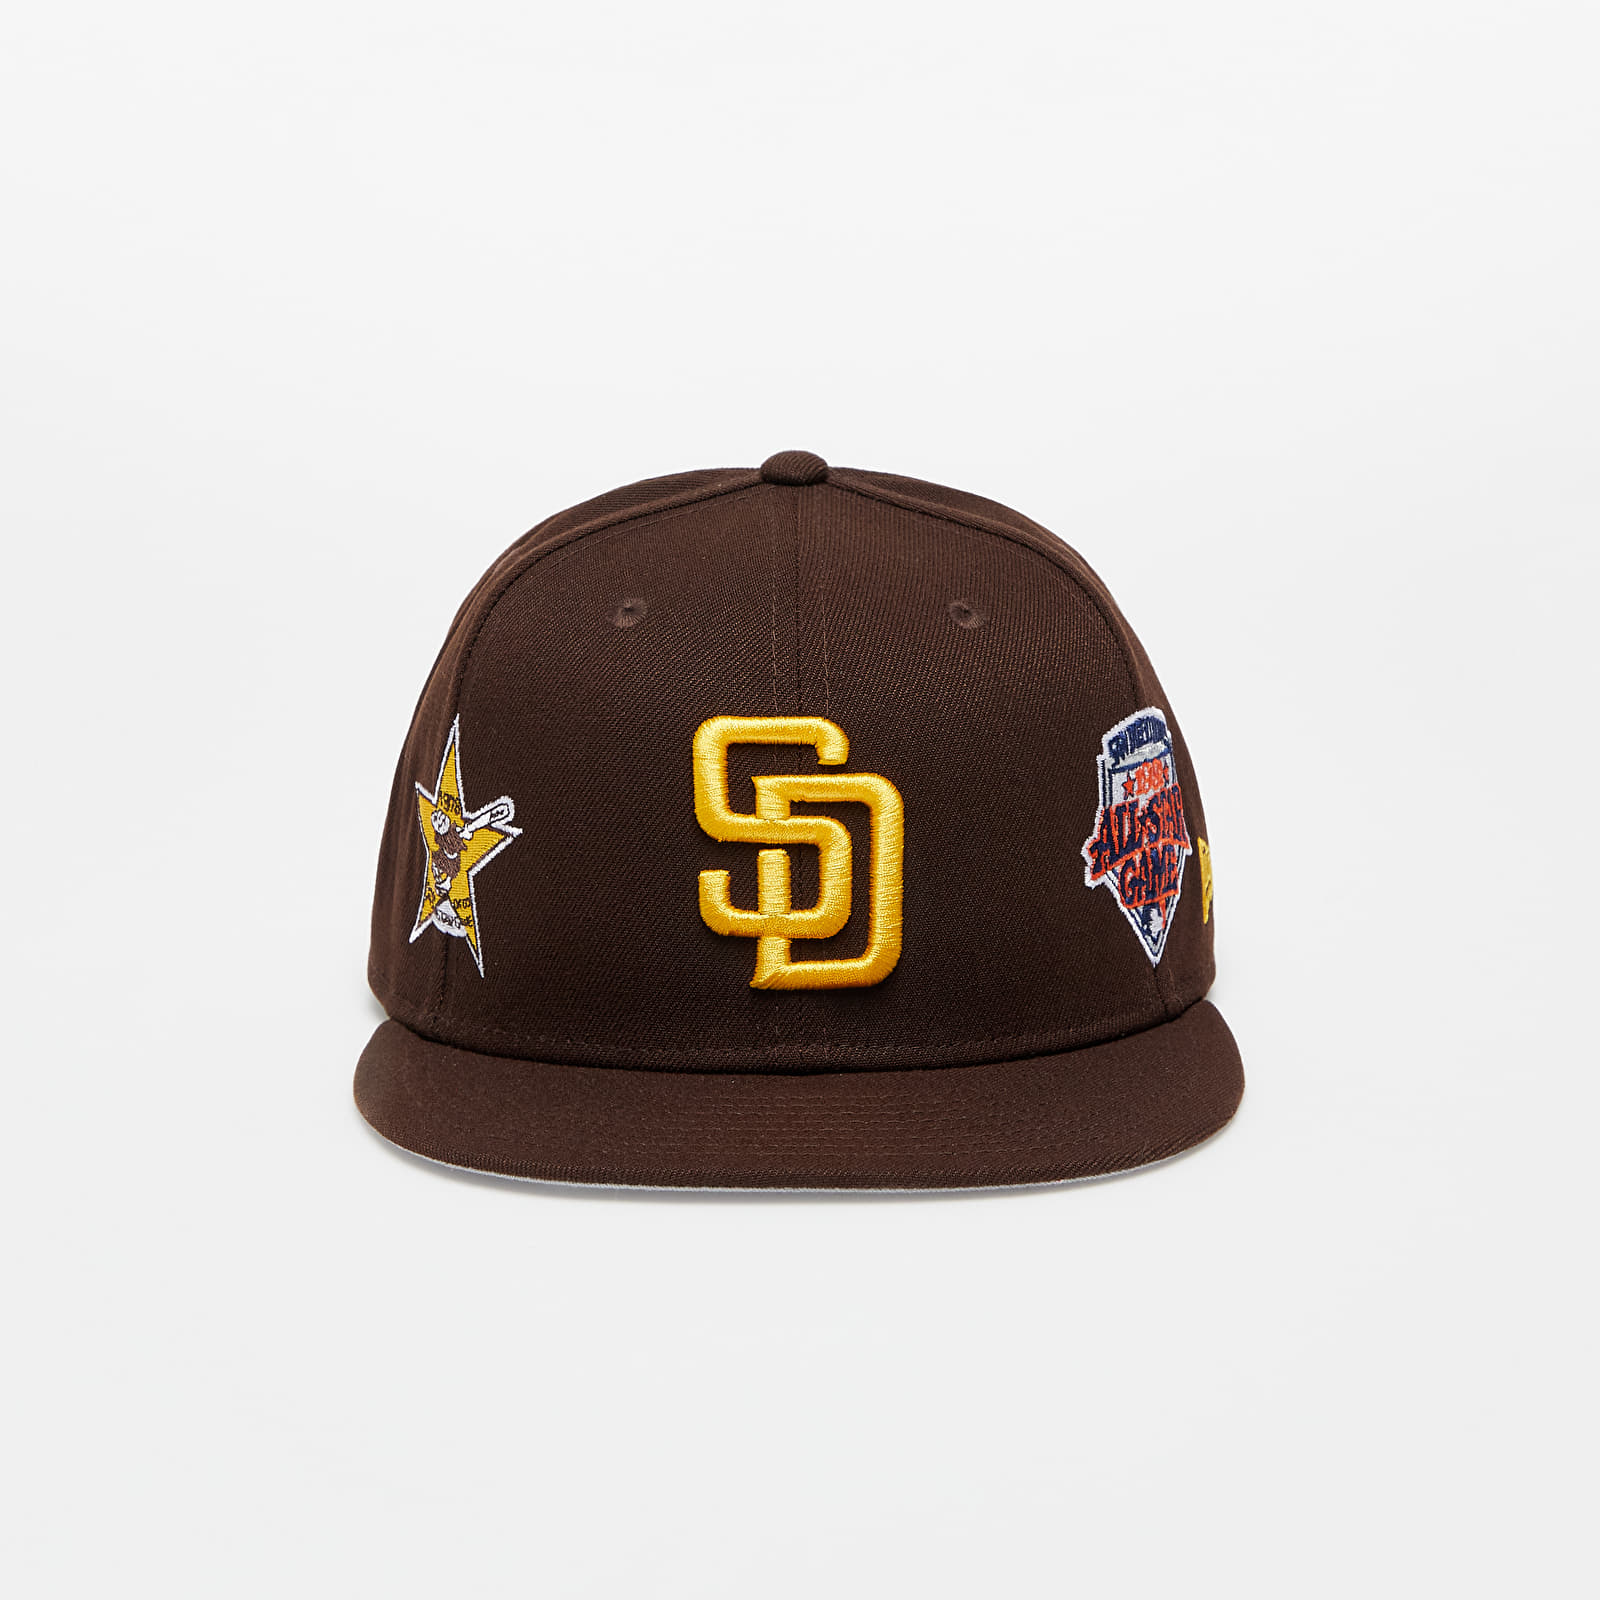 Lids San Diego Padres New Era 59FIFTY Fitted Hat - Black/Gold